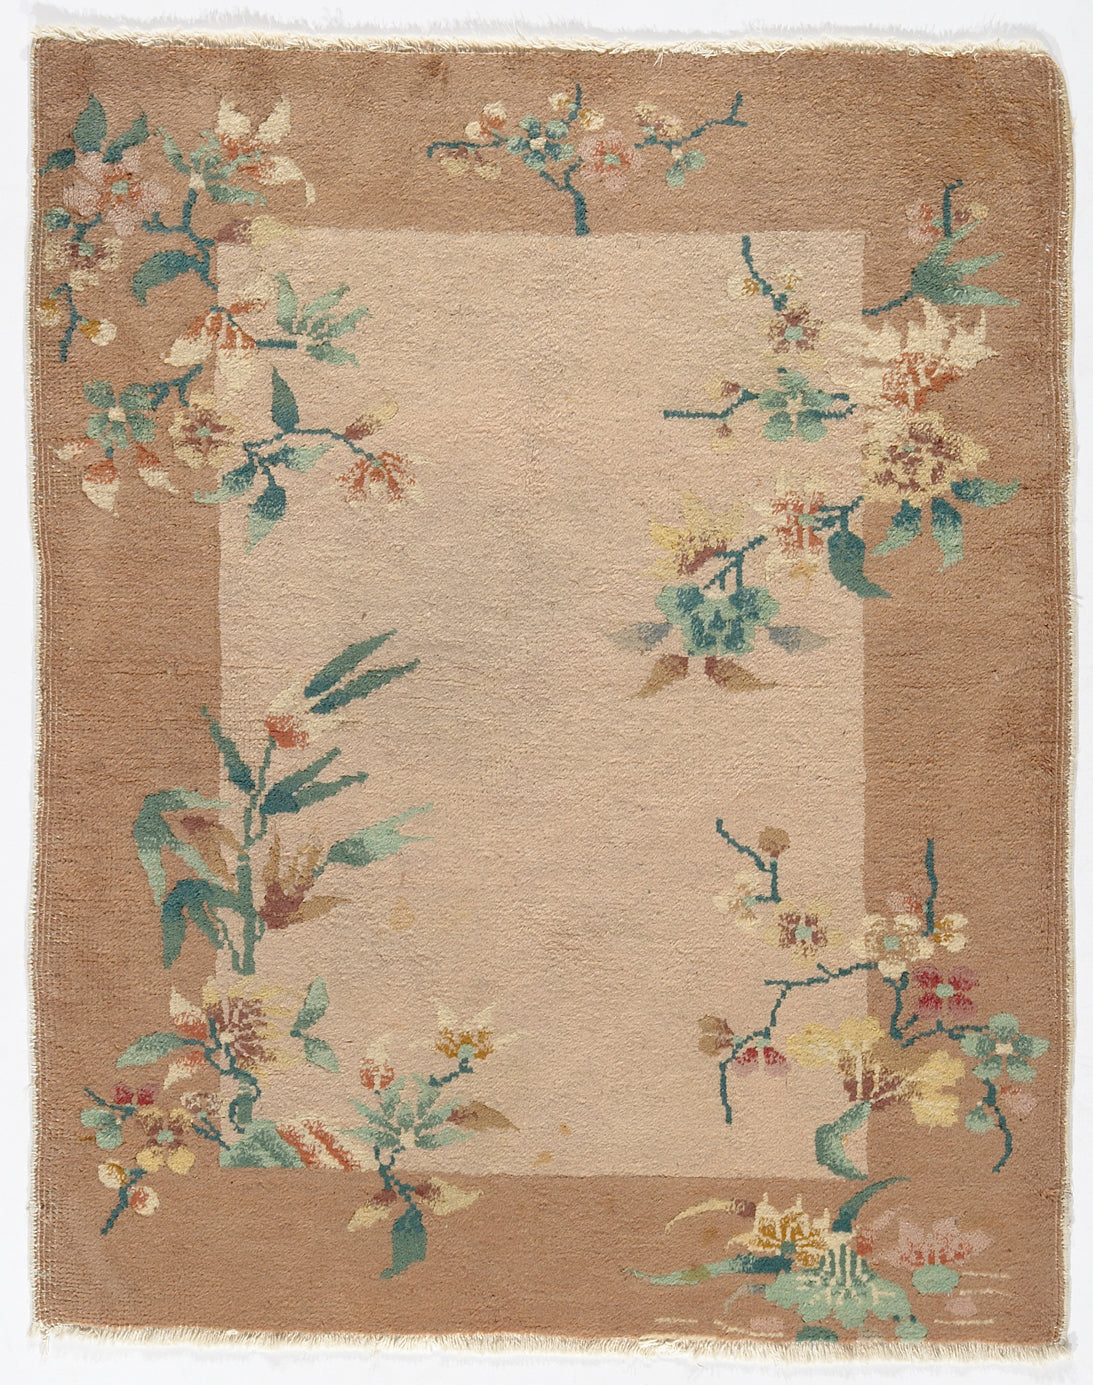 3'x4' Beige and Tan Floral Chinese Art Deco Rug